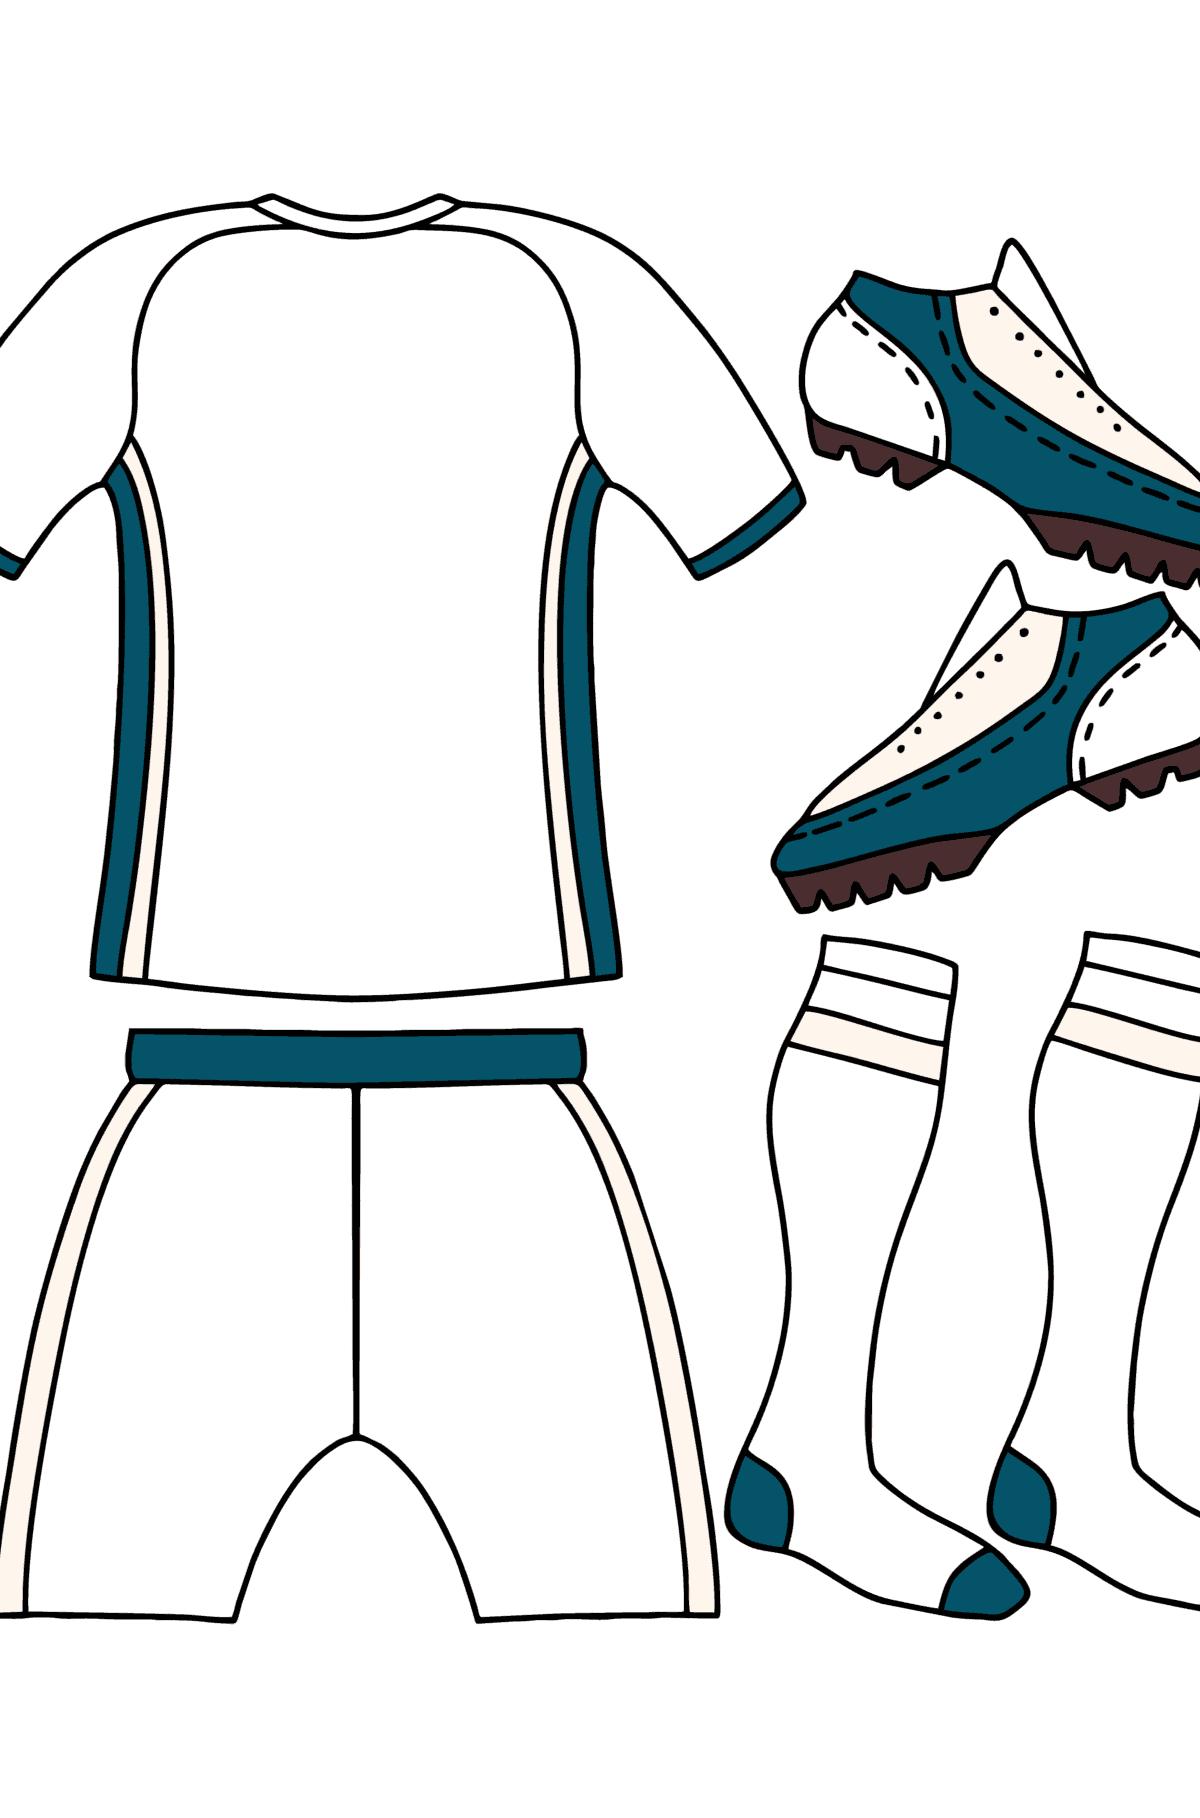 UEFA Football Player Kit сoloring page - Coloring Pages for Kids